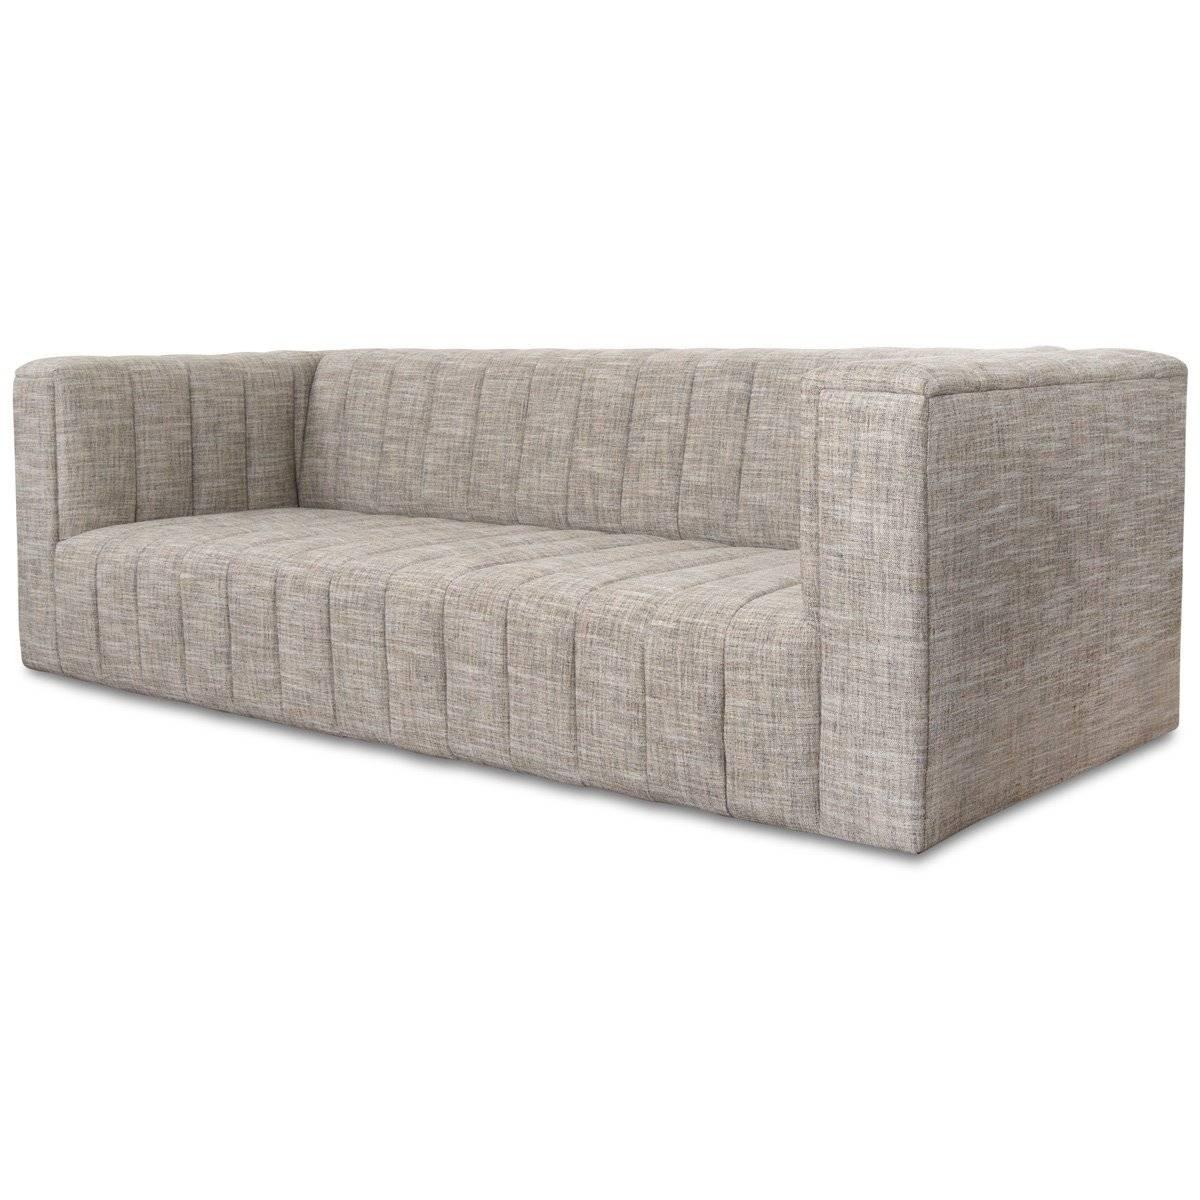 Introducing the Monaco Sofa. The front of the sofa features top to floor channel tufting creating striking vertical lines on a chubby modern frame. Customizable plush linen highlights this sleek look. The symmetry of the design of the Monaco Sofa